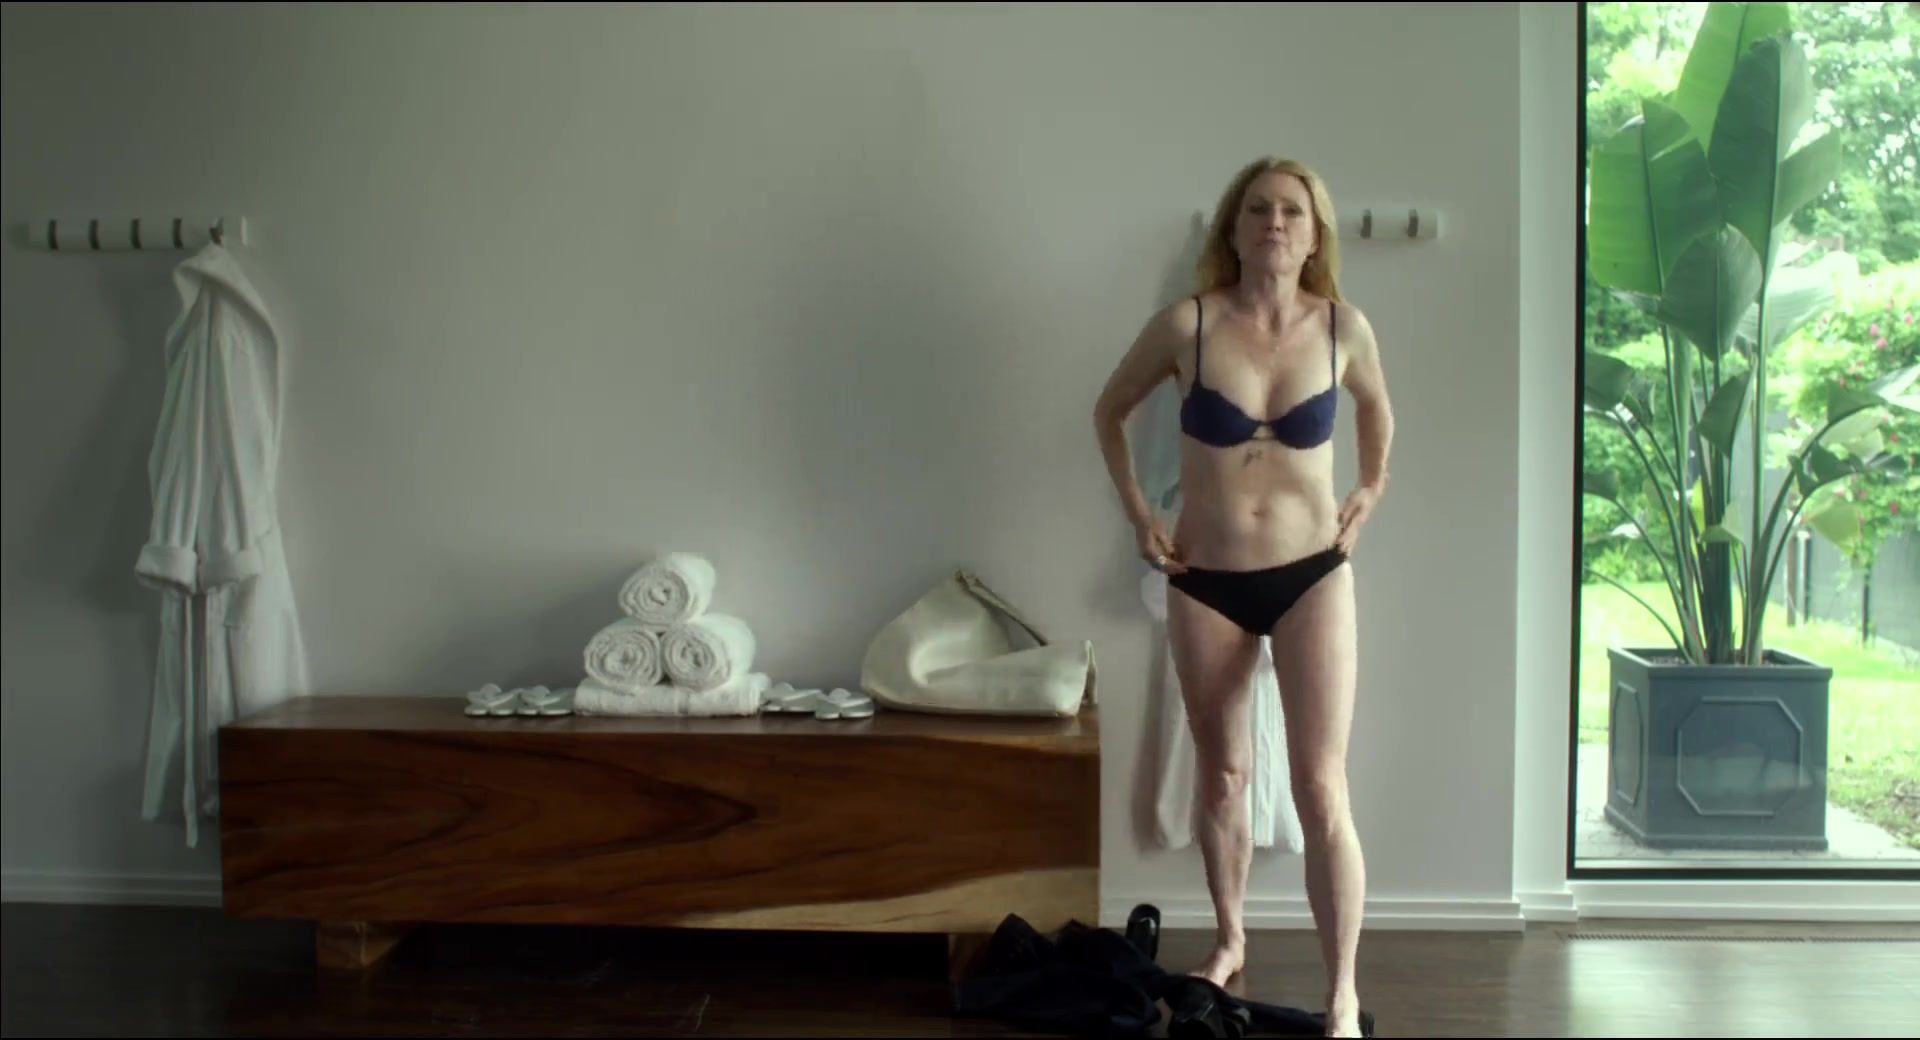 DTVideo Submission video & Lesbian Celebs Scene | Celebrity: Julianne Moore nude | The movie "Maps to the Stars" Animation - 2